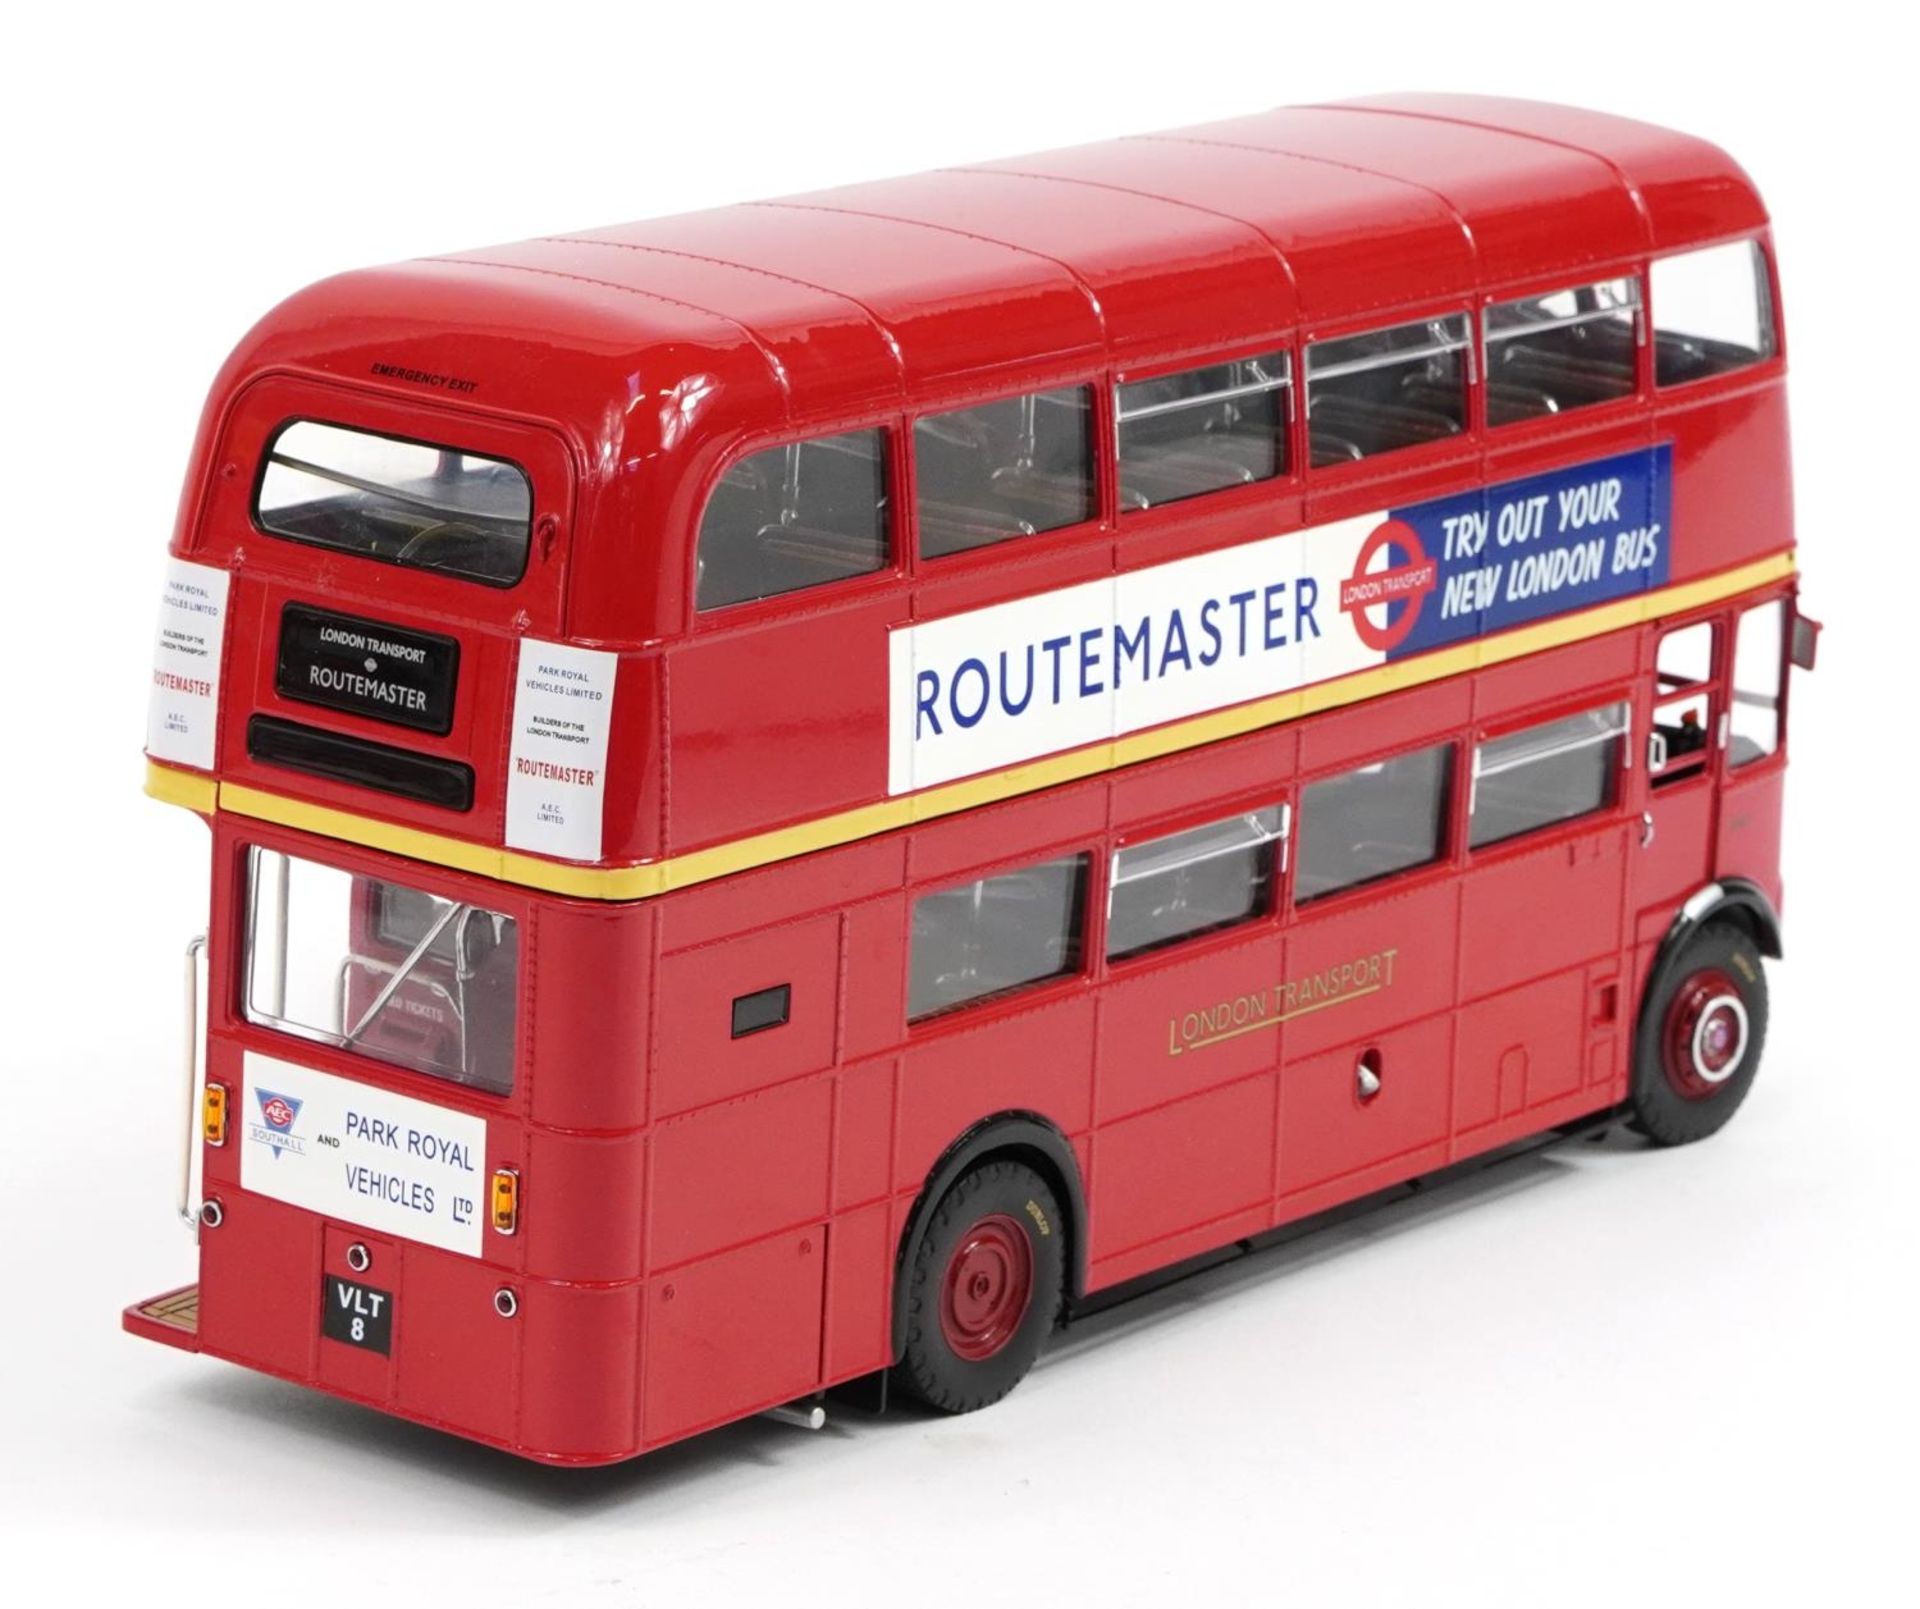 Sun Star Routemaster diecast VM8-VLT Routemaster bus with box, scale1:24 - Image 3 of 4